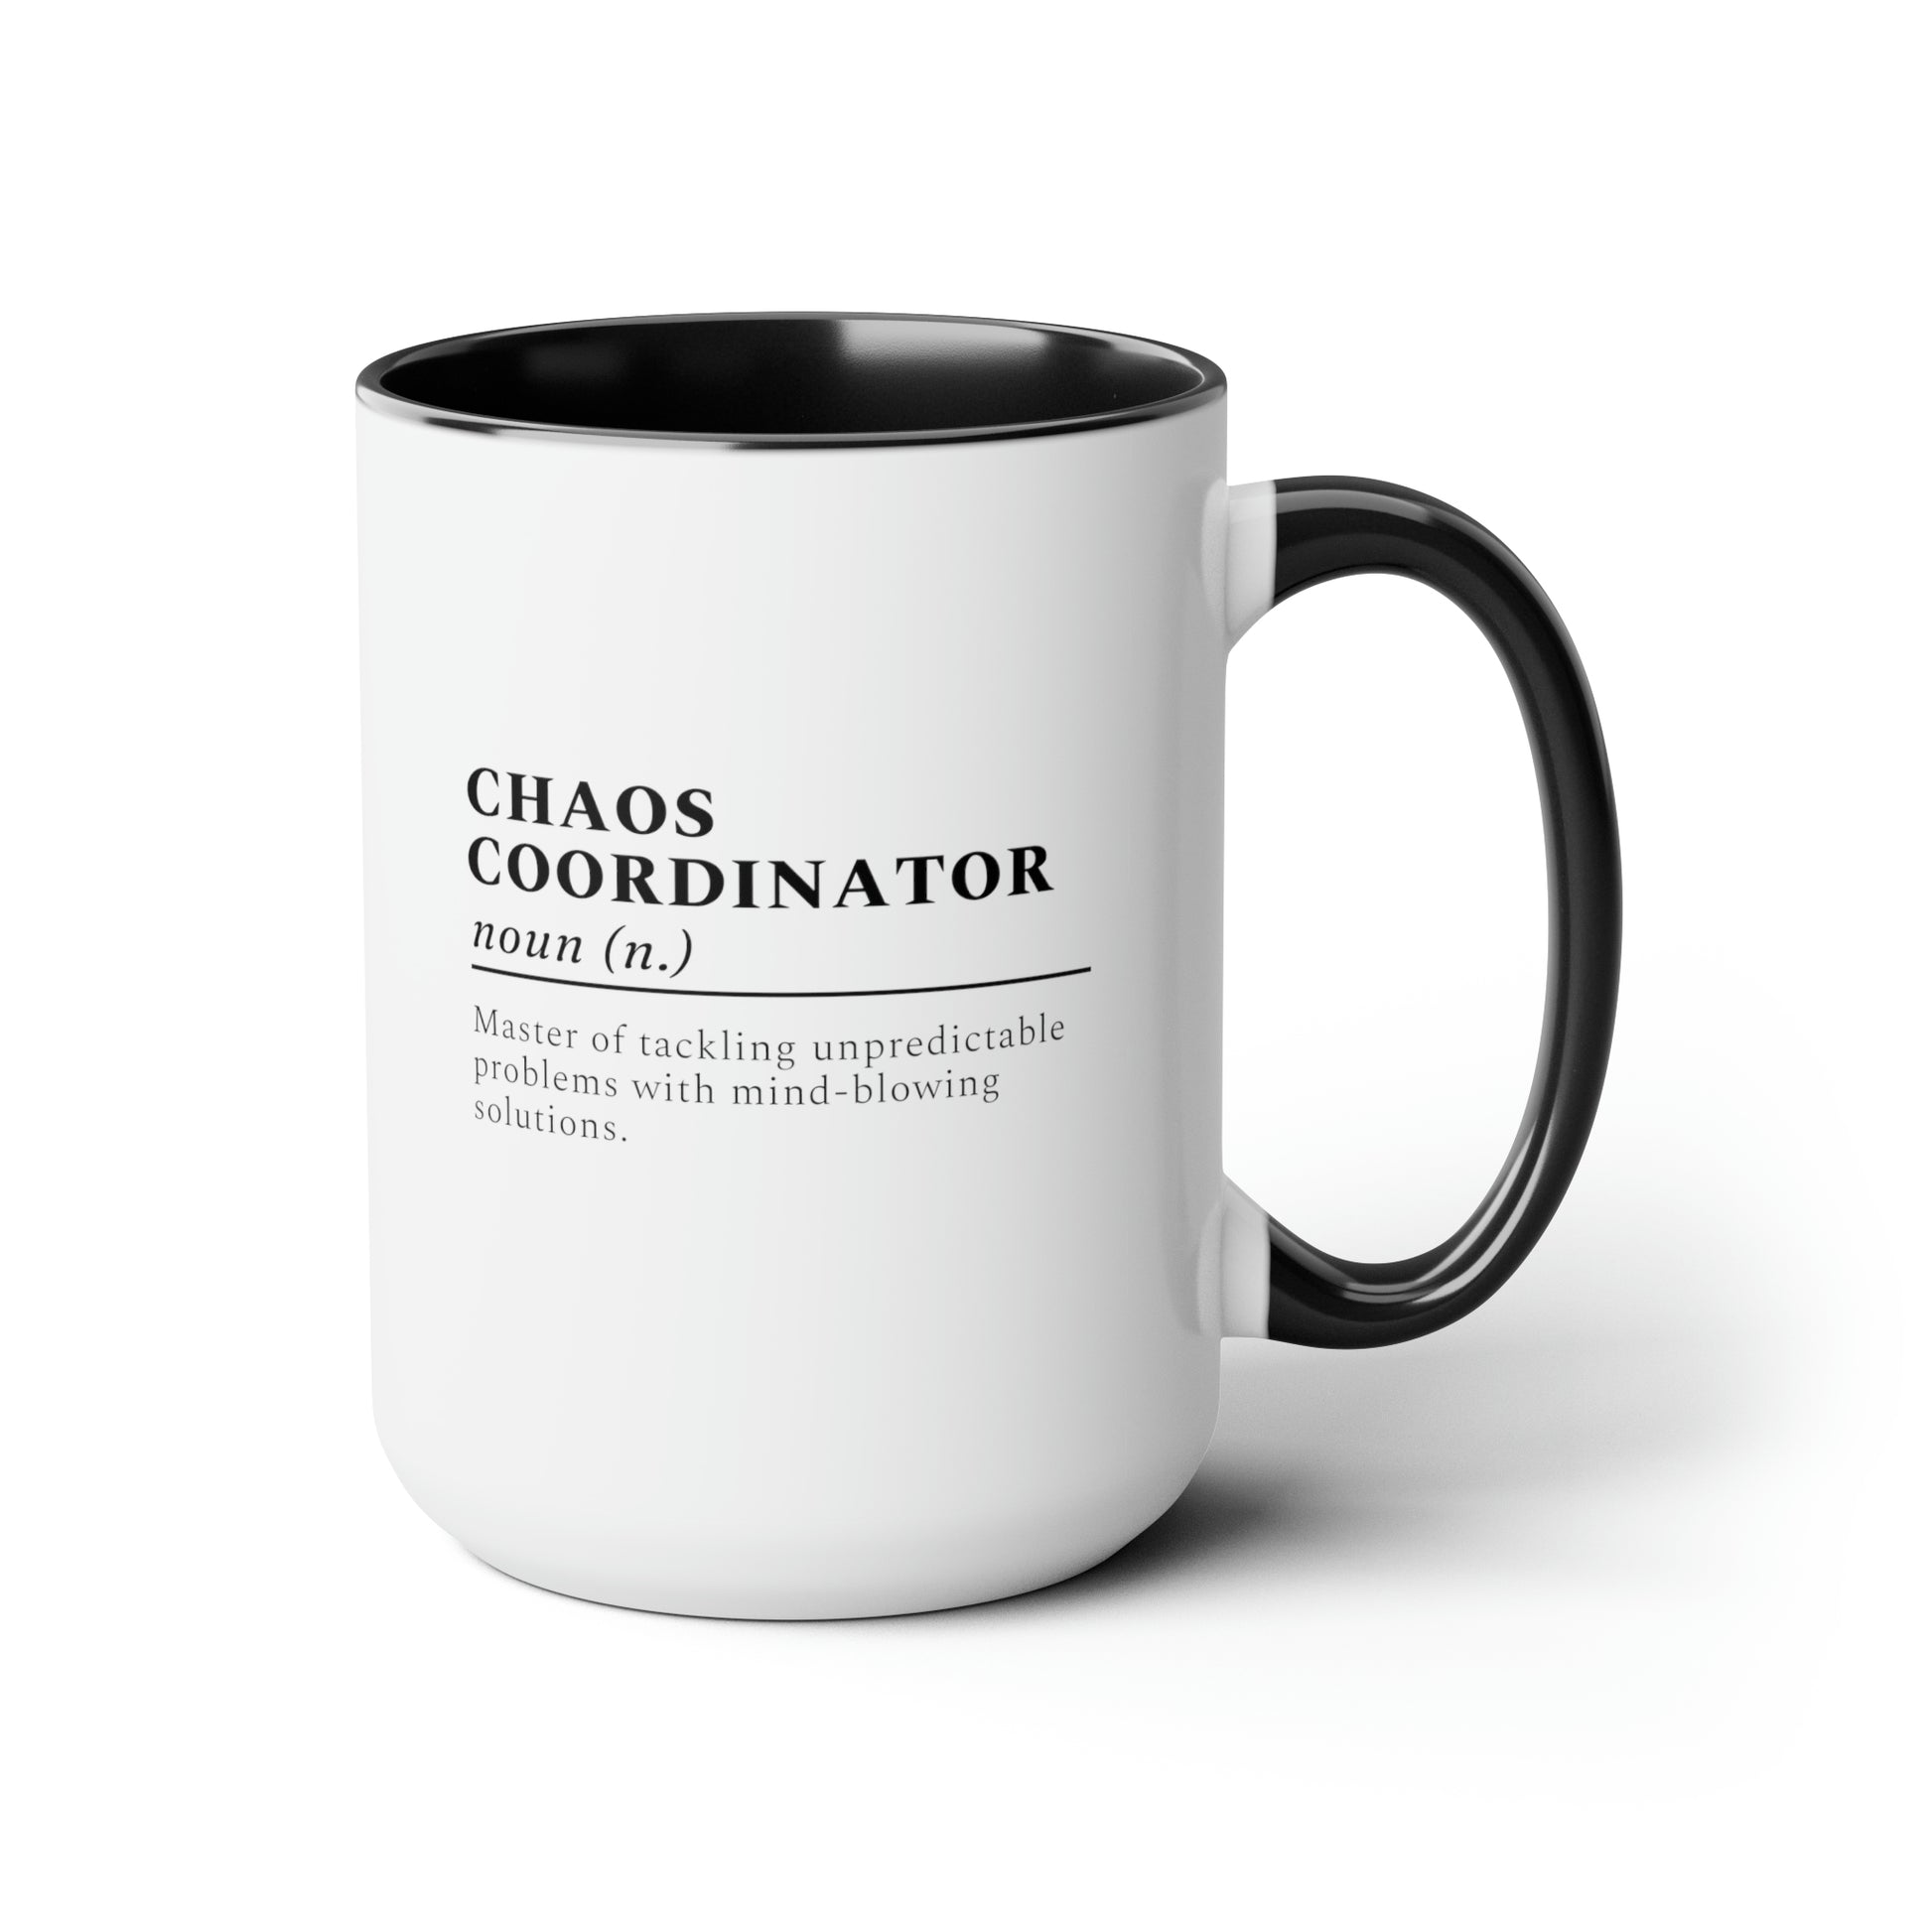 Chaos Coordinator Definition 15oz white with black accent funny large coffee mug gift for boss office manager appreciation christmas secret santa idea waveywares wavey wares wavywares wavy wares